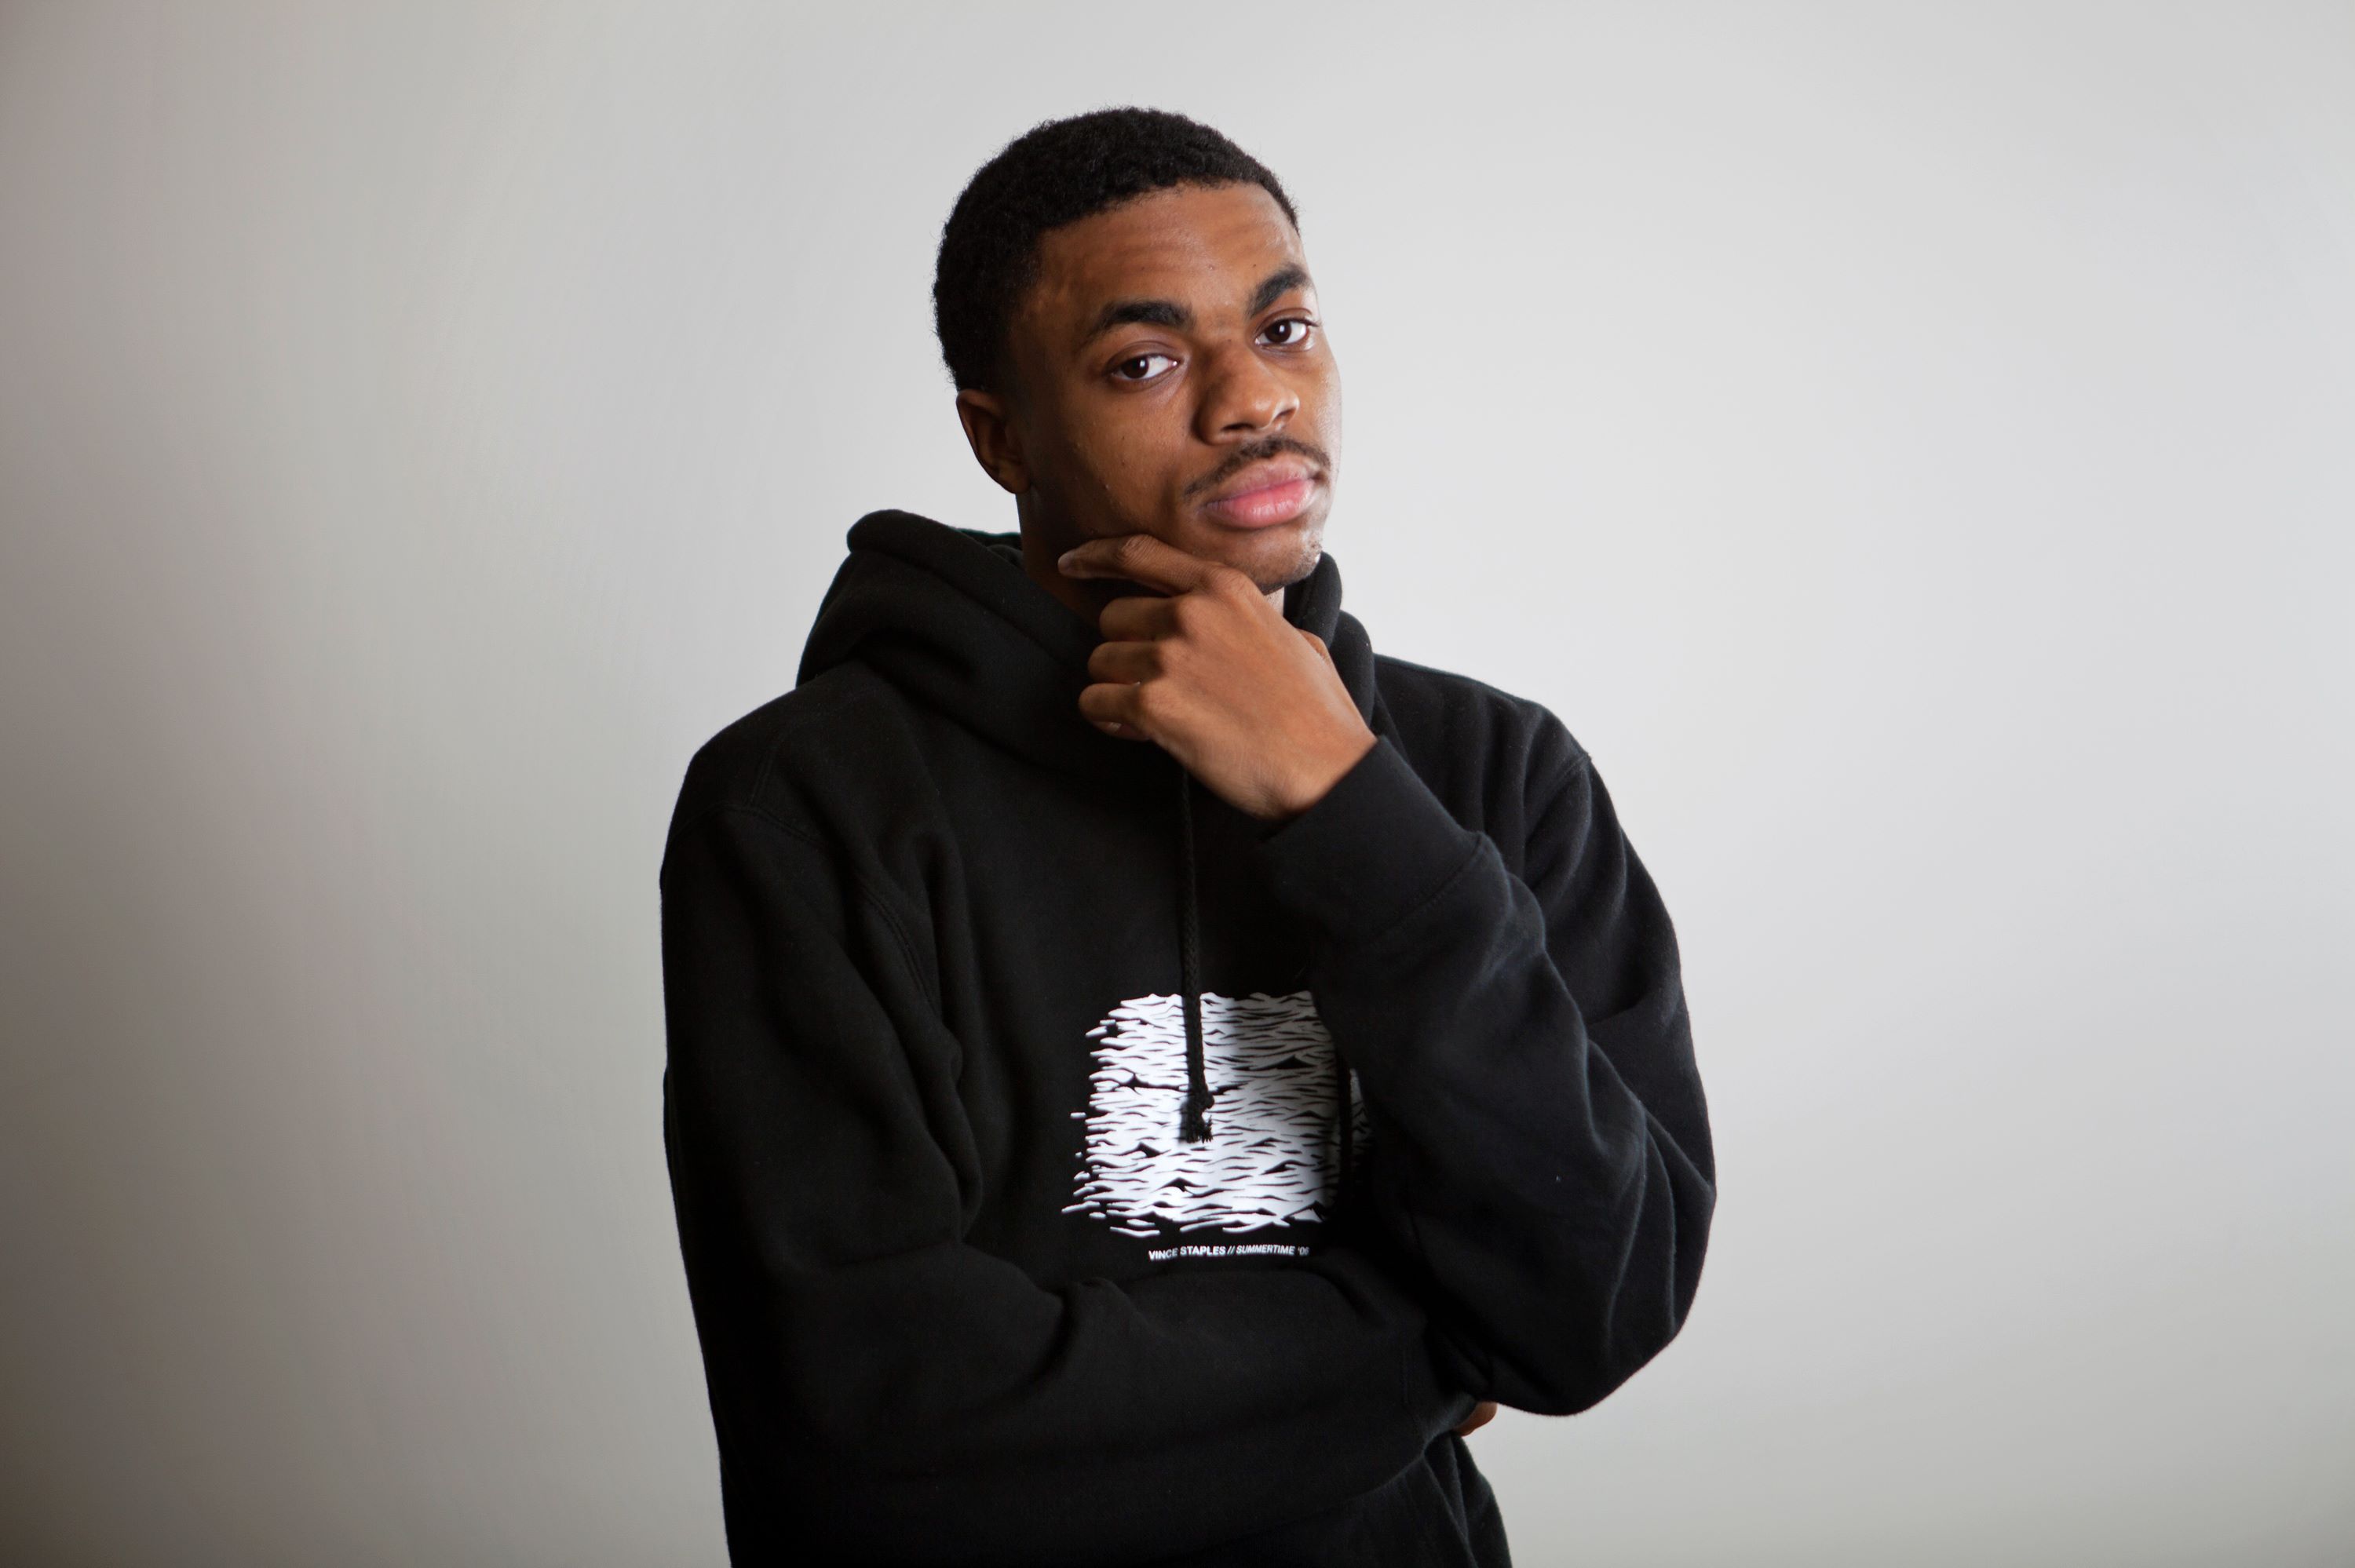 What Record Label Is Vince Staples Signed Too